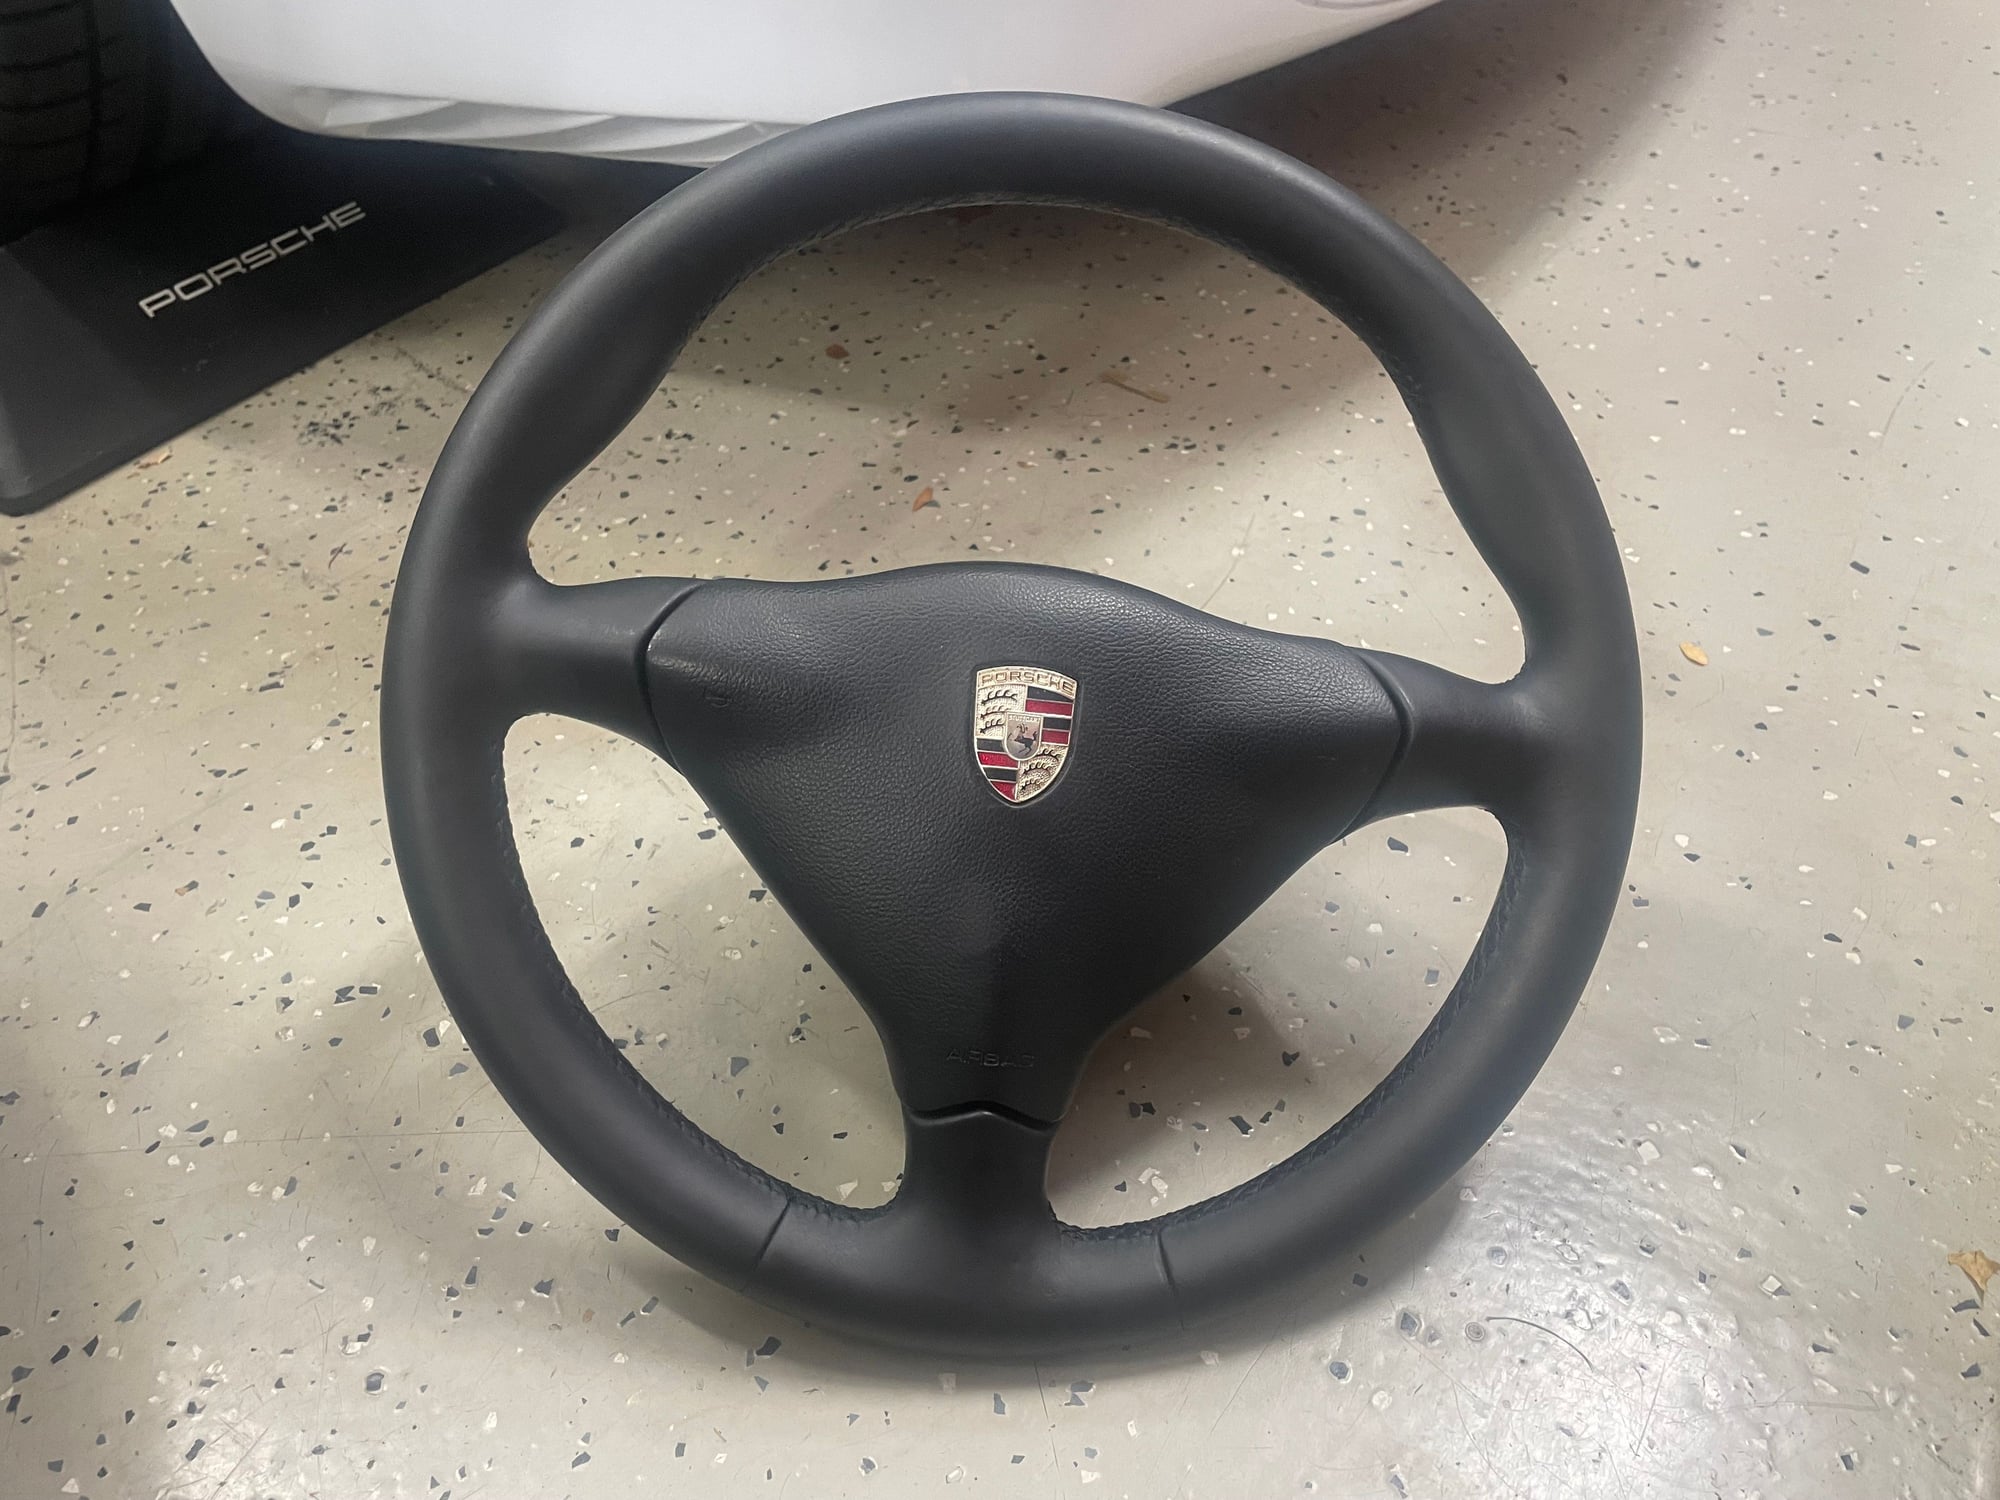 Interior/Upholstery - 3 spoke 996 wheel with airbag  Fits 993, 996, 986 - Used - -1 to 2024  All Models - Centerville, OH 45459, United States